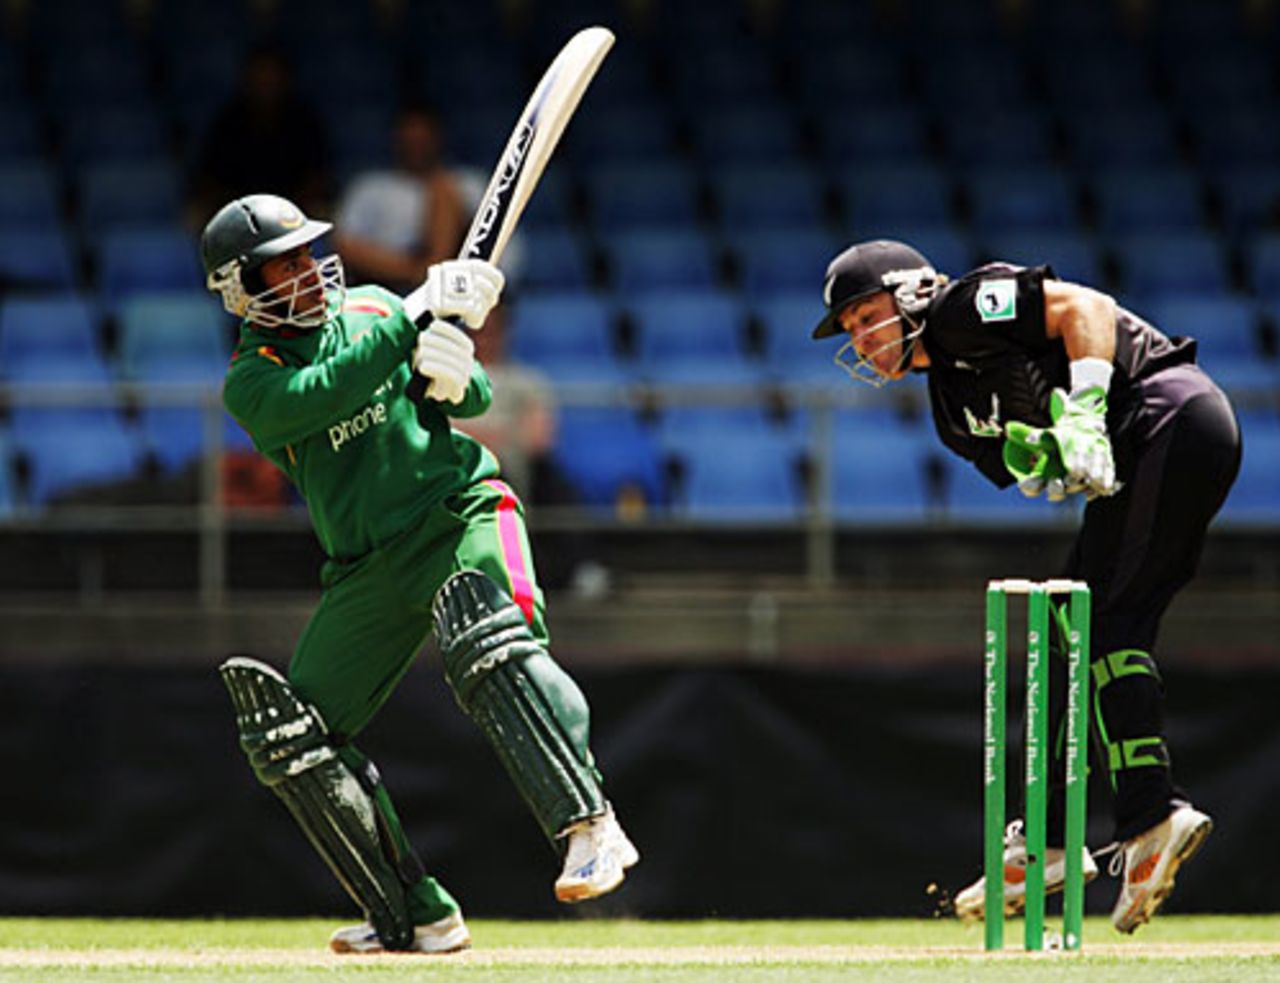 Mohammad Ashraful looks to play behind the wicket, New Zealand v Bangladesh, 1st ODI, Auckland, December 26, 2007